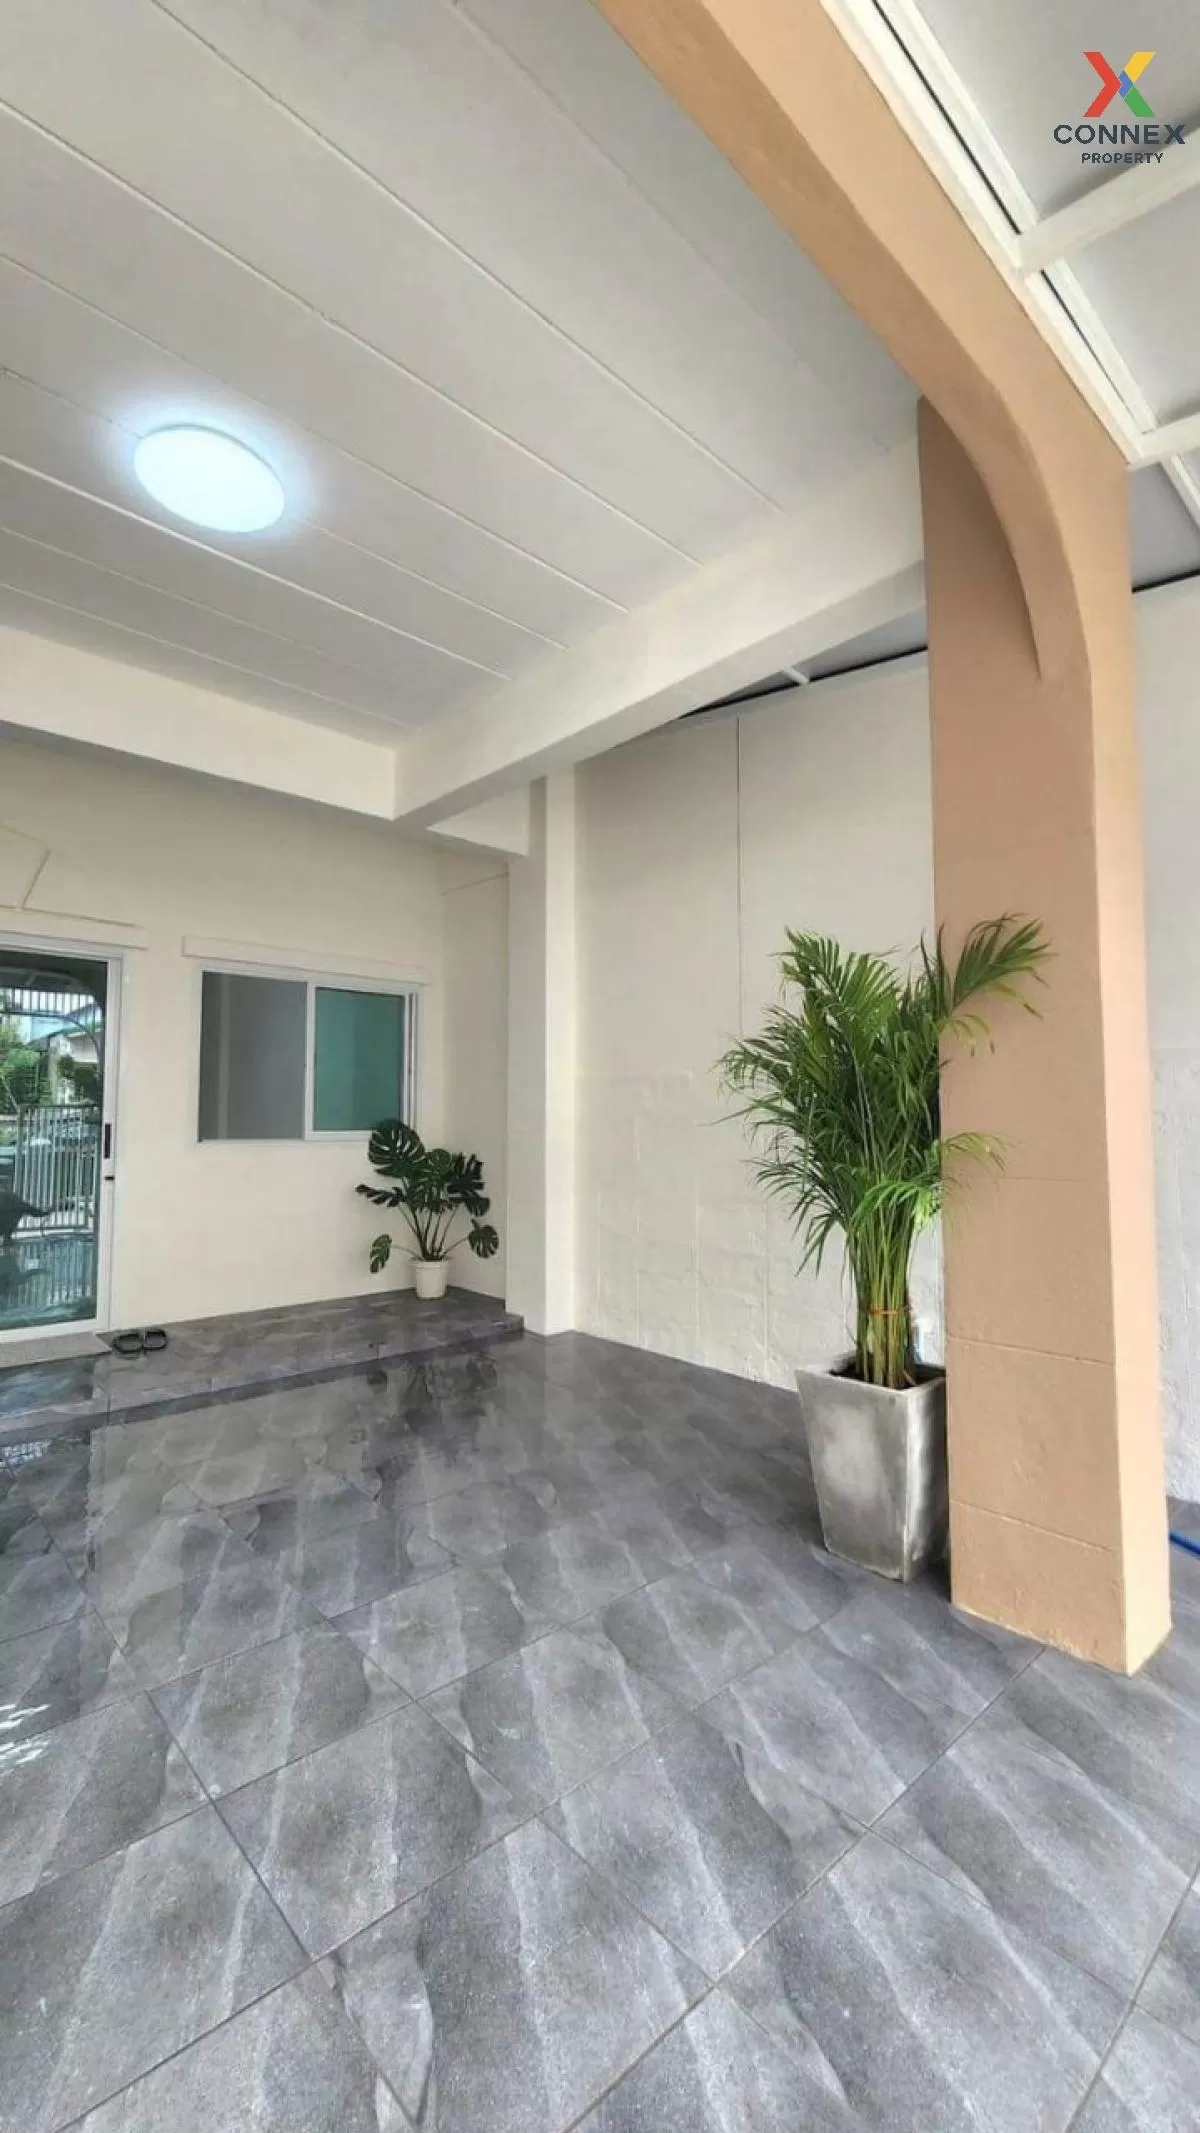 For Sale Townhouse/Townhome  , Klong Luang Home Place , Khlong Song , khlong Luang , Pathum Thani , CX-84737